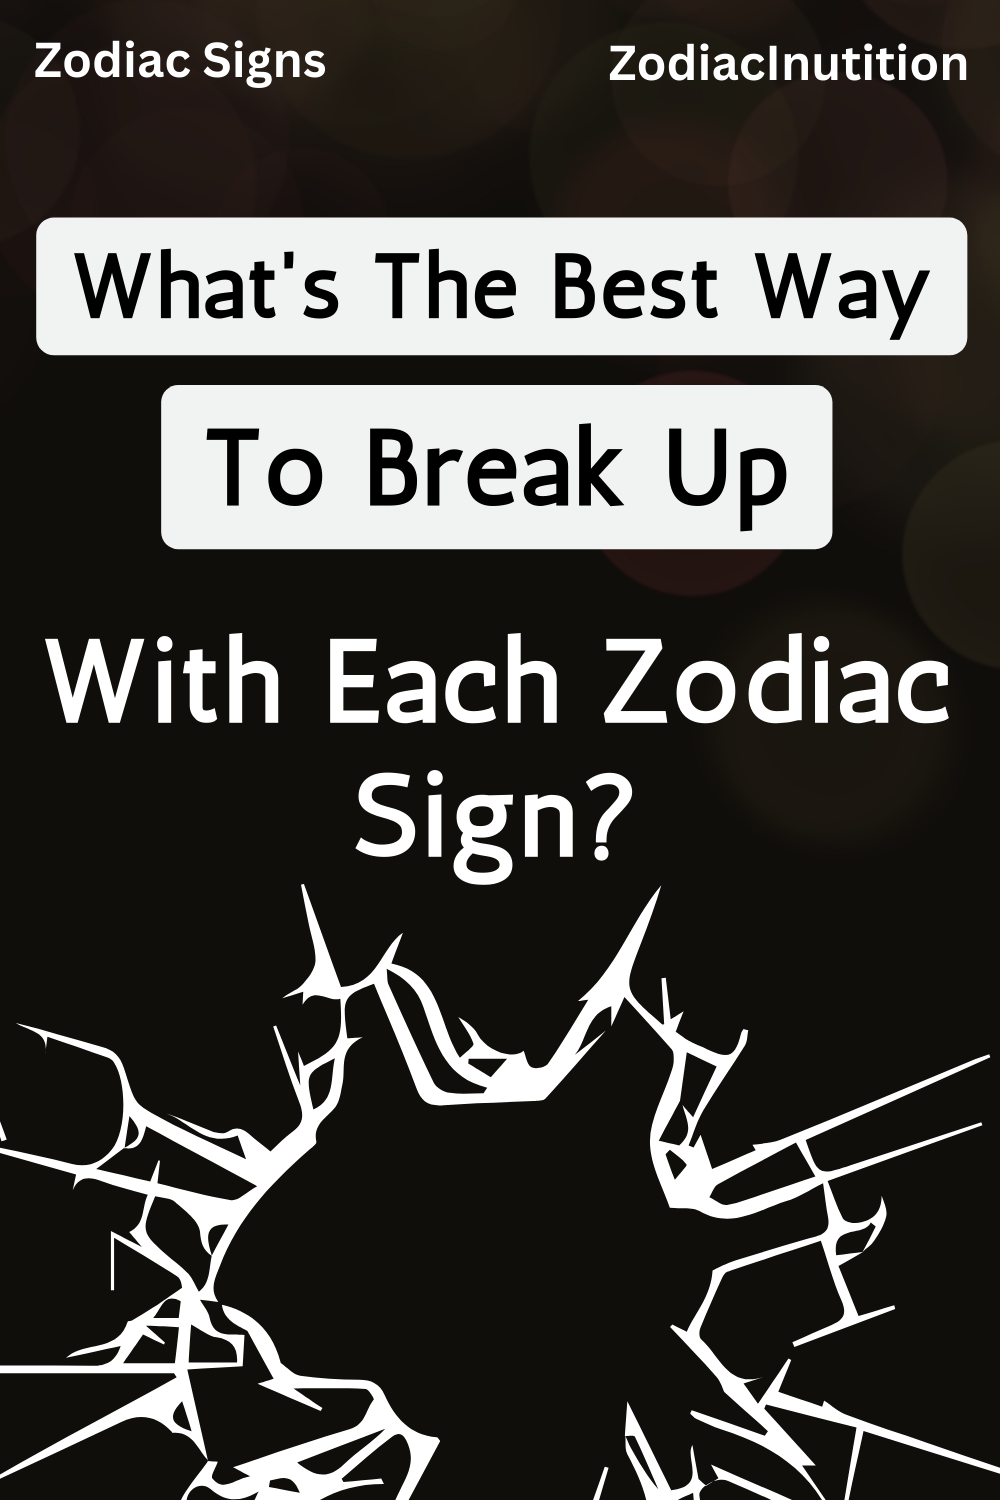 What's The Best Way To Break Up With Each Zodiac Sign?